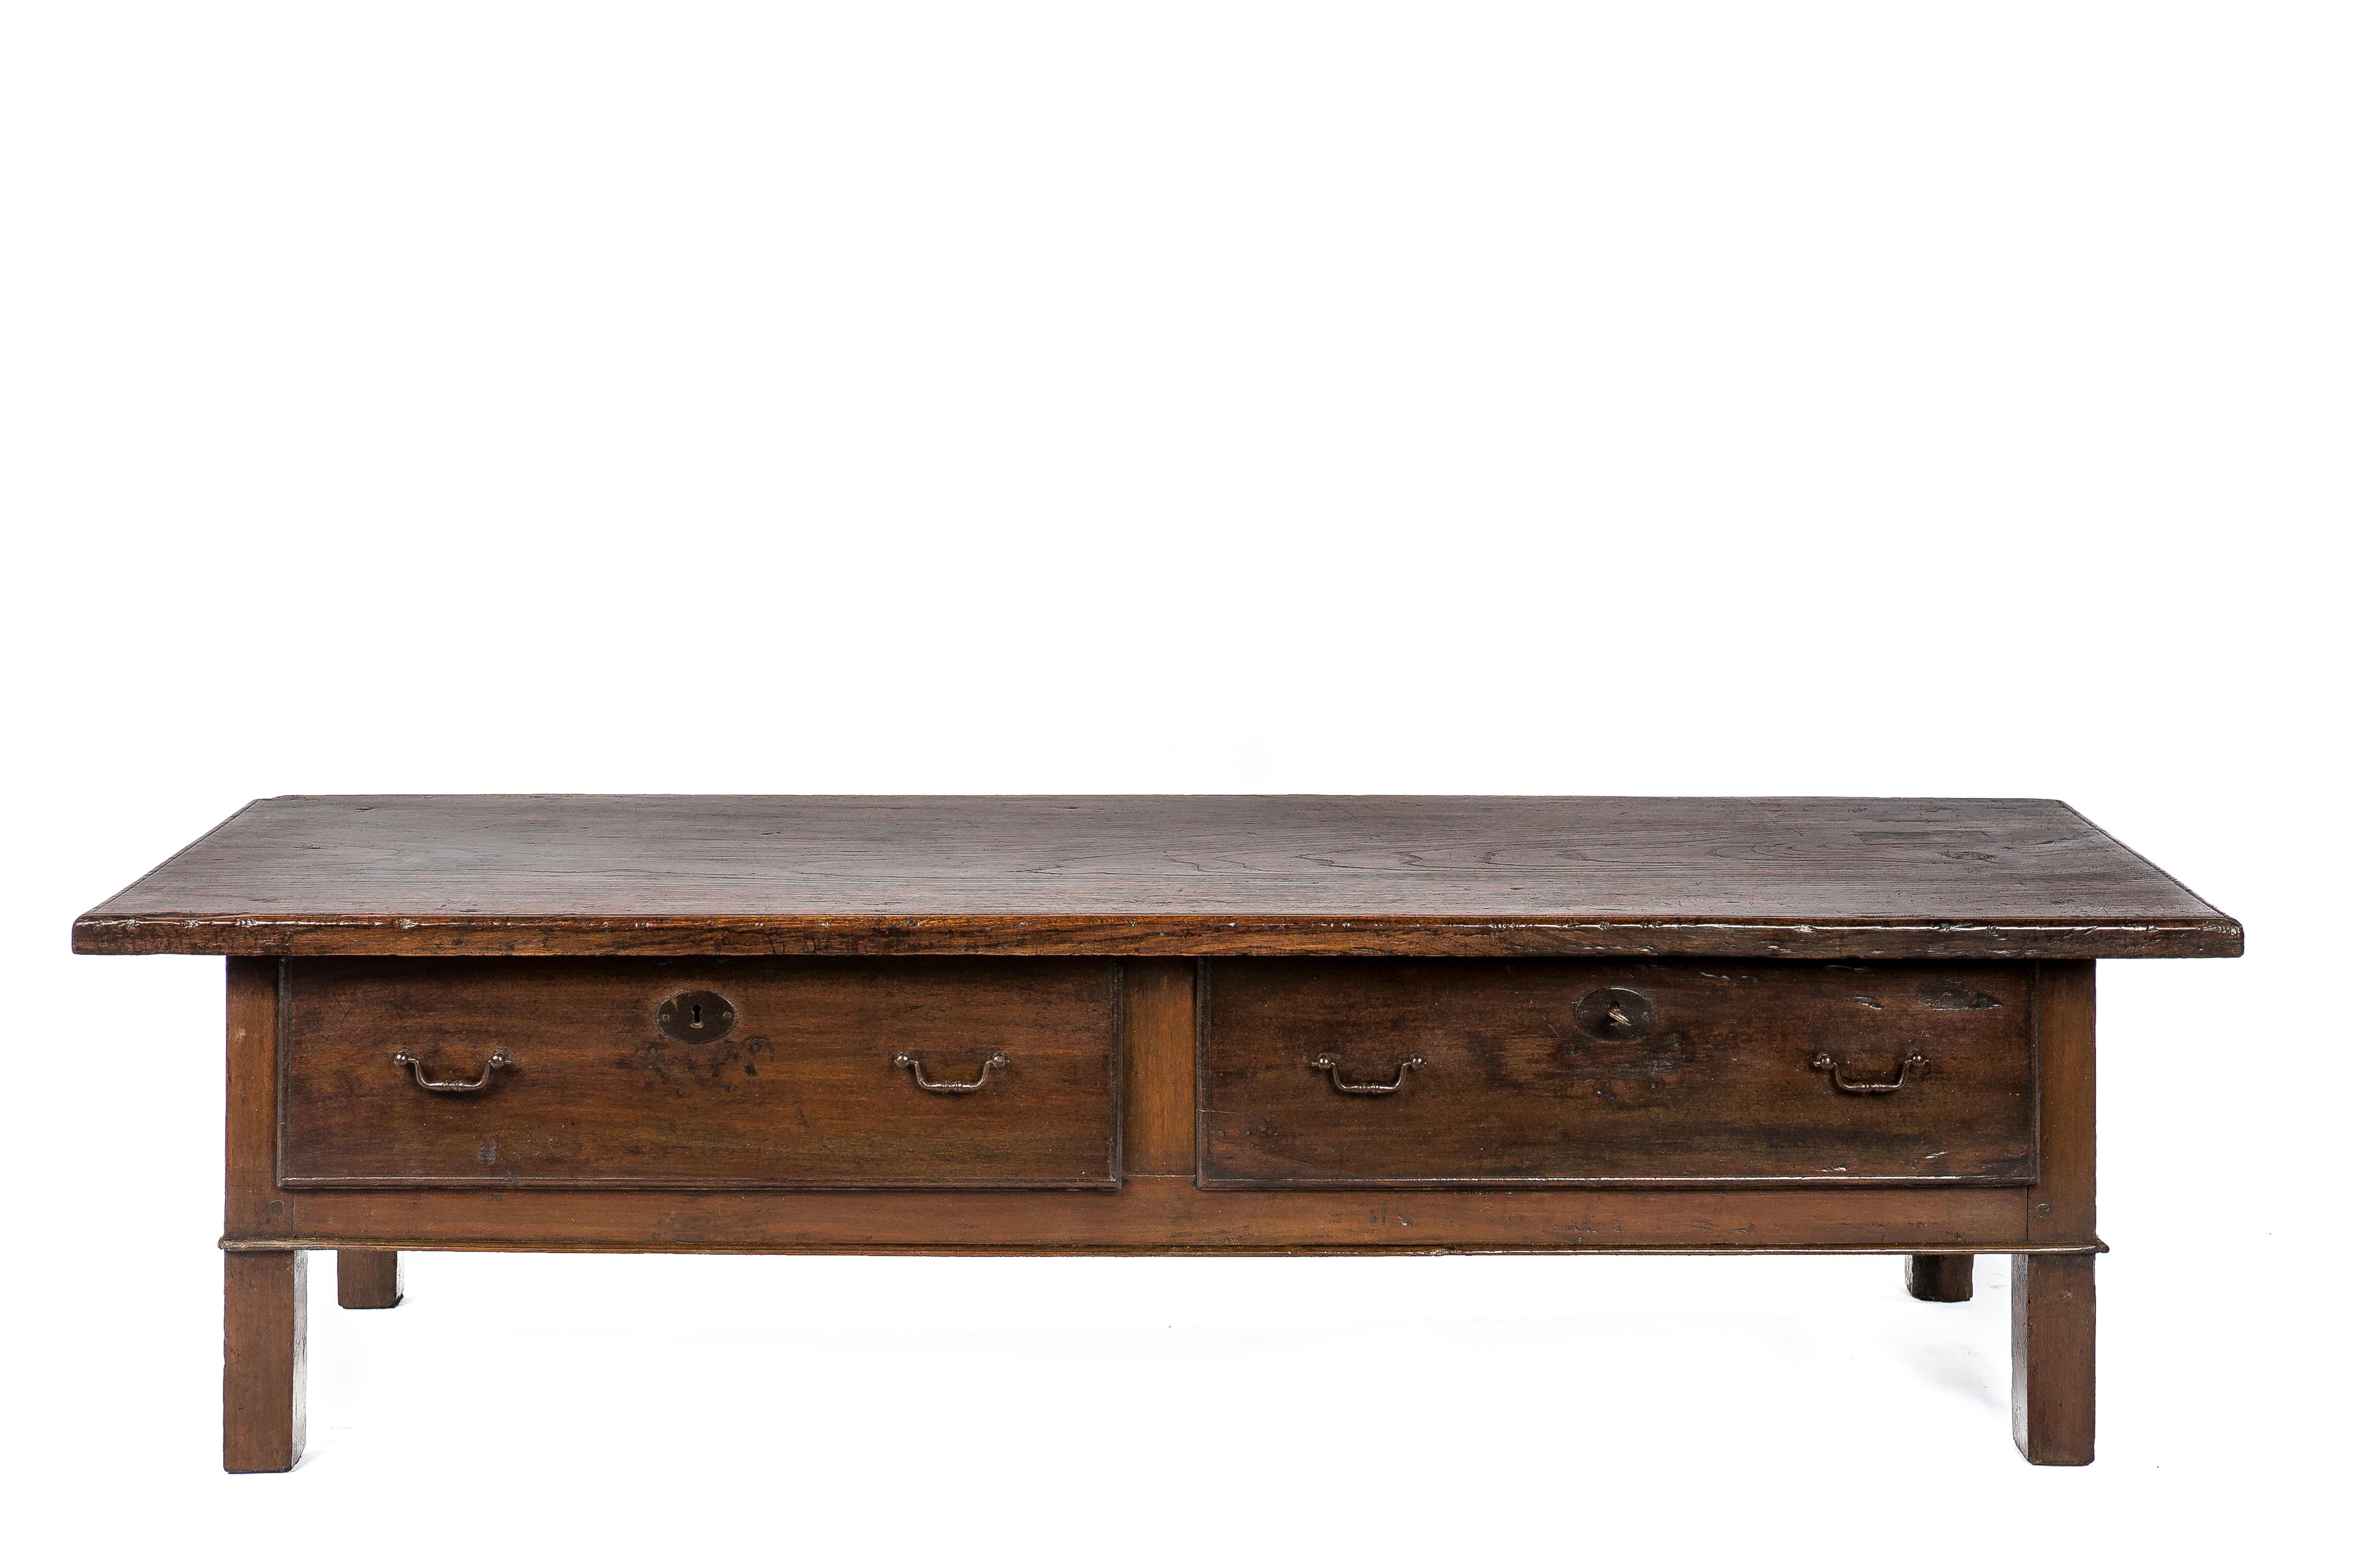 This beautiful antique chestnut coffee table was made in Spain around 1820. The table has a top made from a single board of solid Chestnut and displays a wonderful grain pattern and deep gloss. The top has a thickness of 1.38 inches and has simple